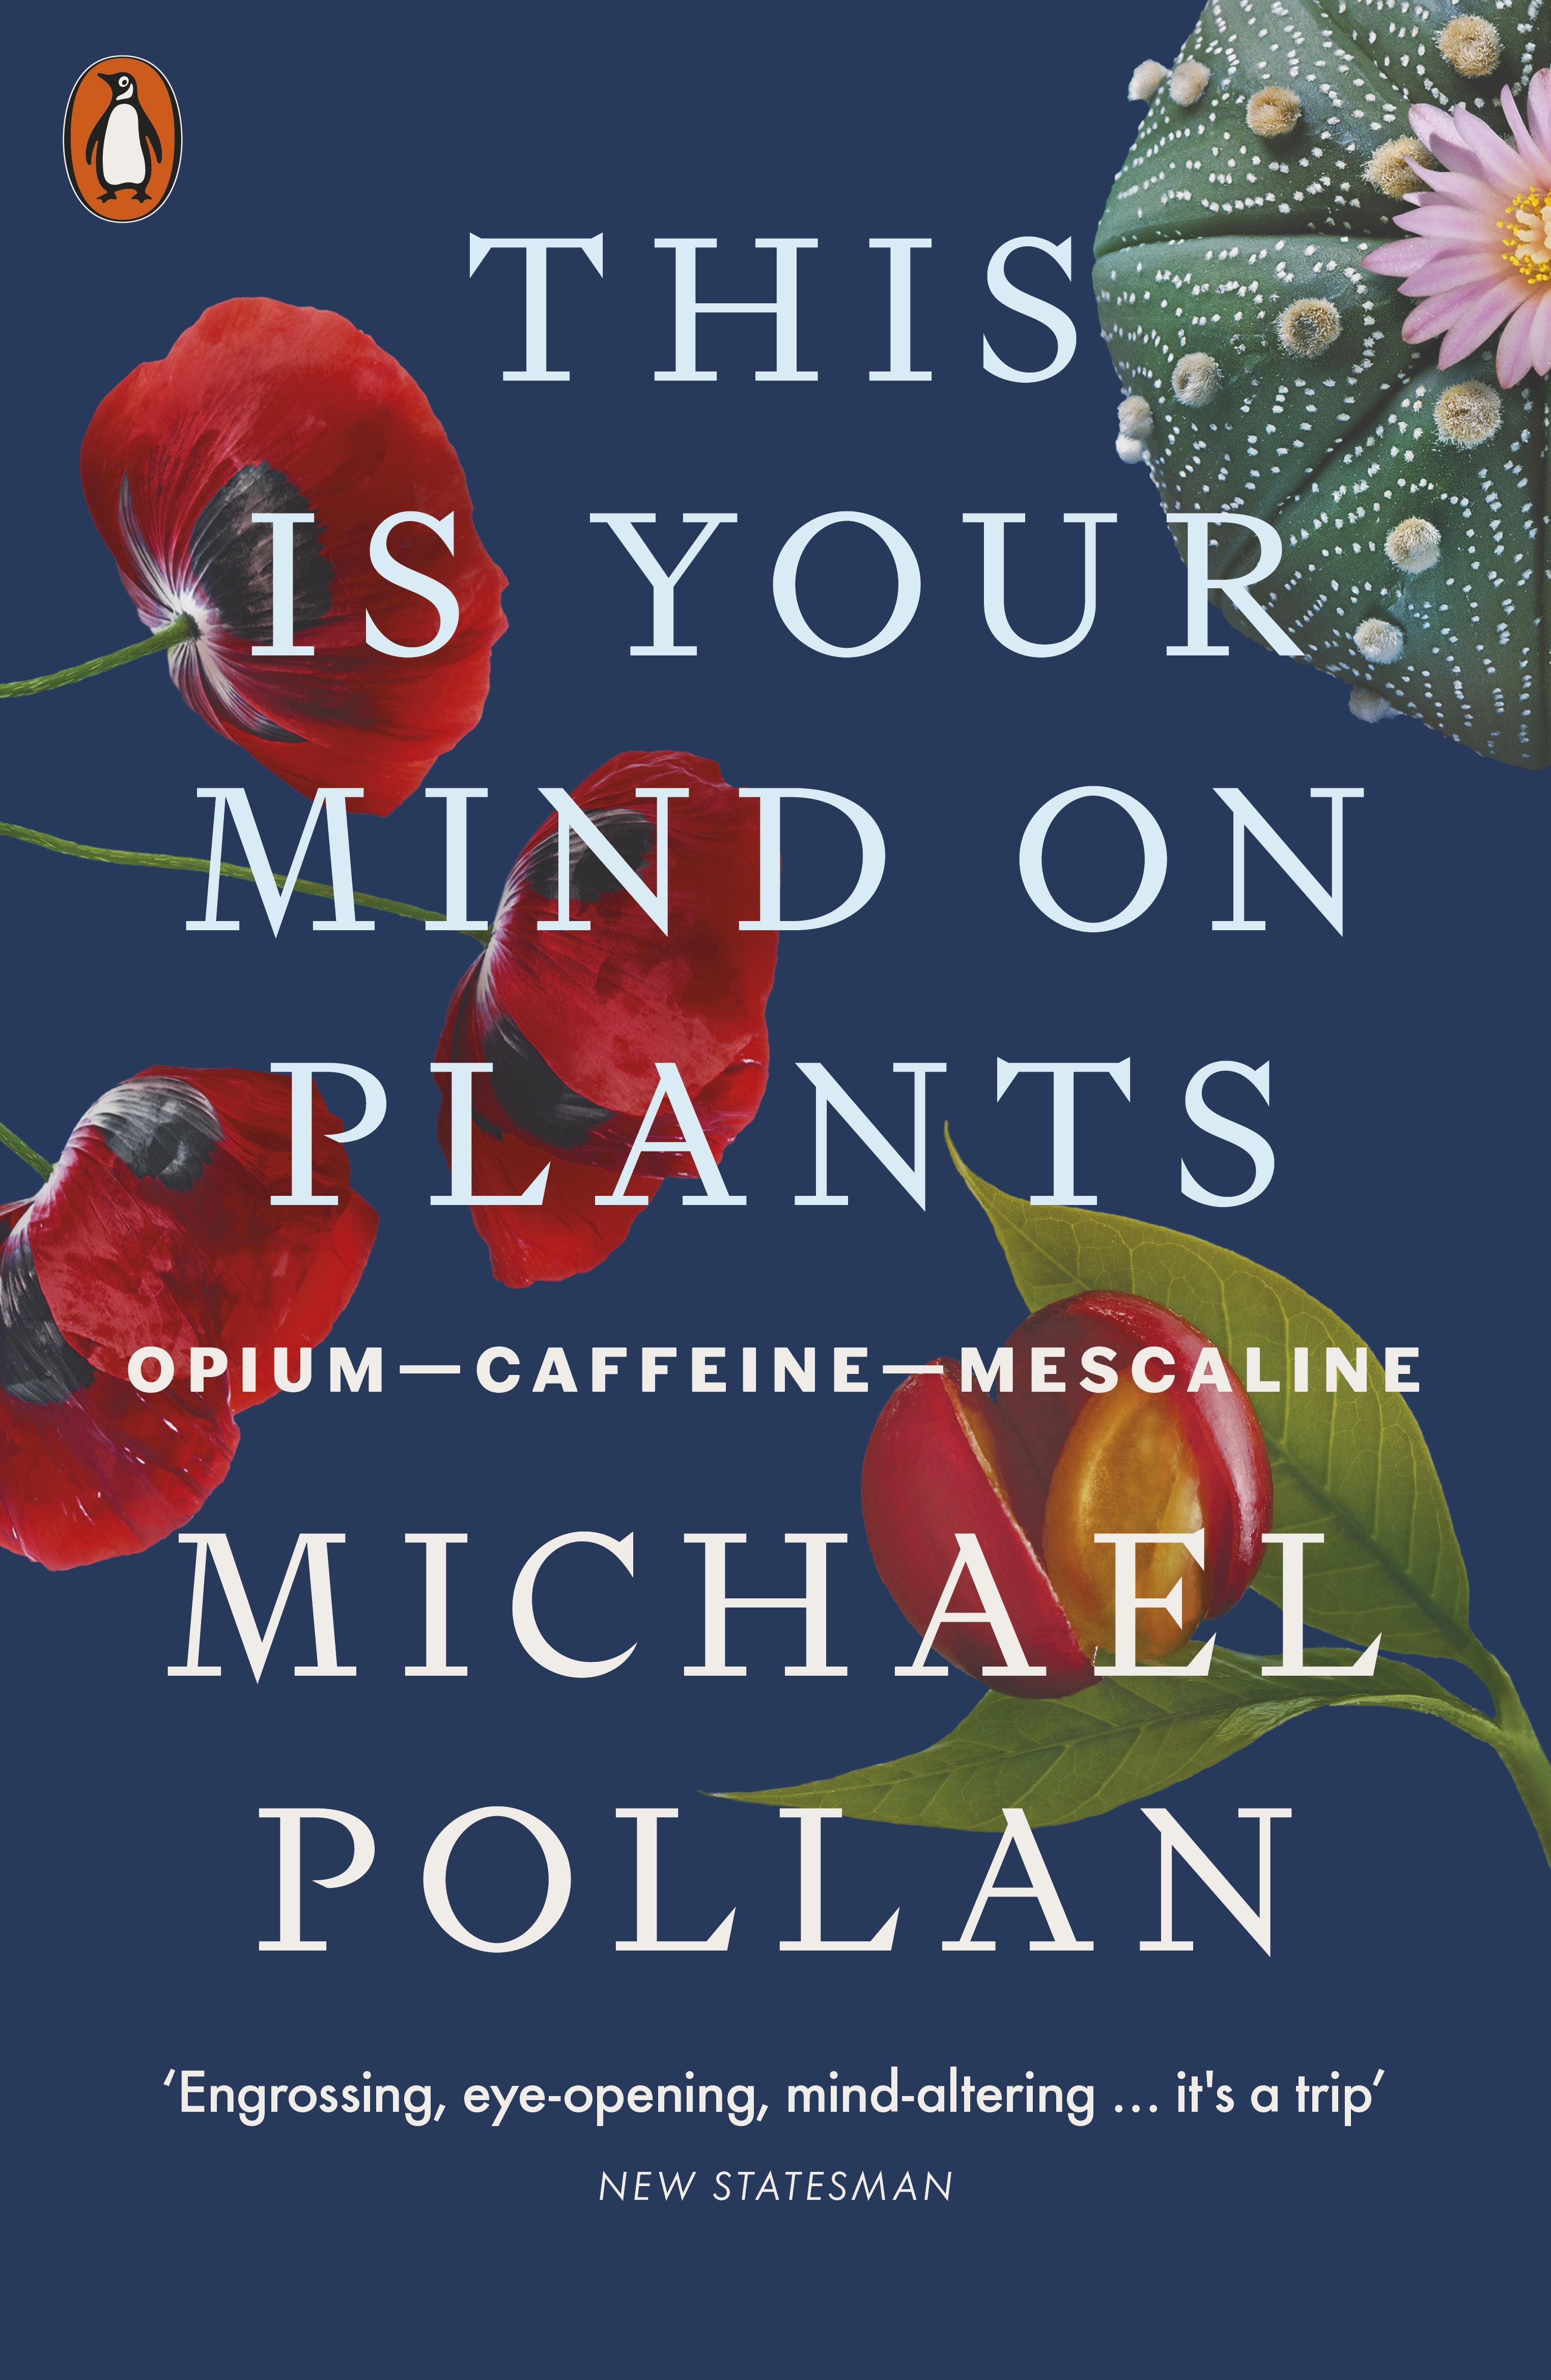 Book “This Is Your Mind On Plants” by Michael Pollan — July 7, 2022